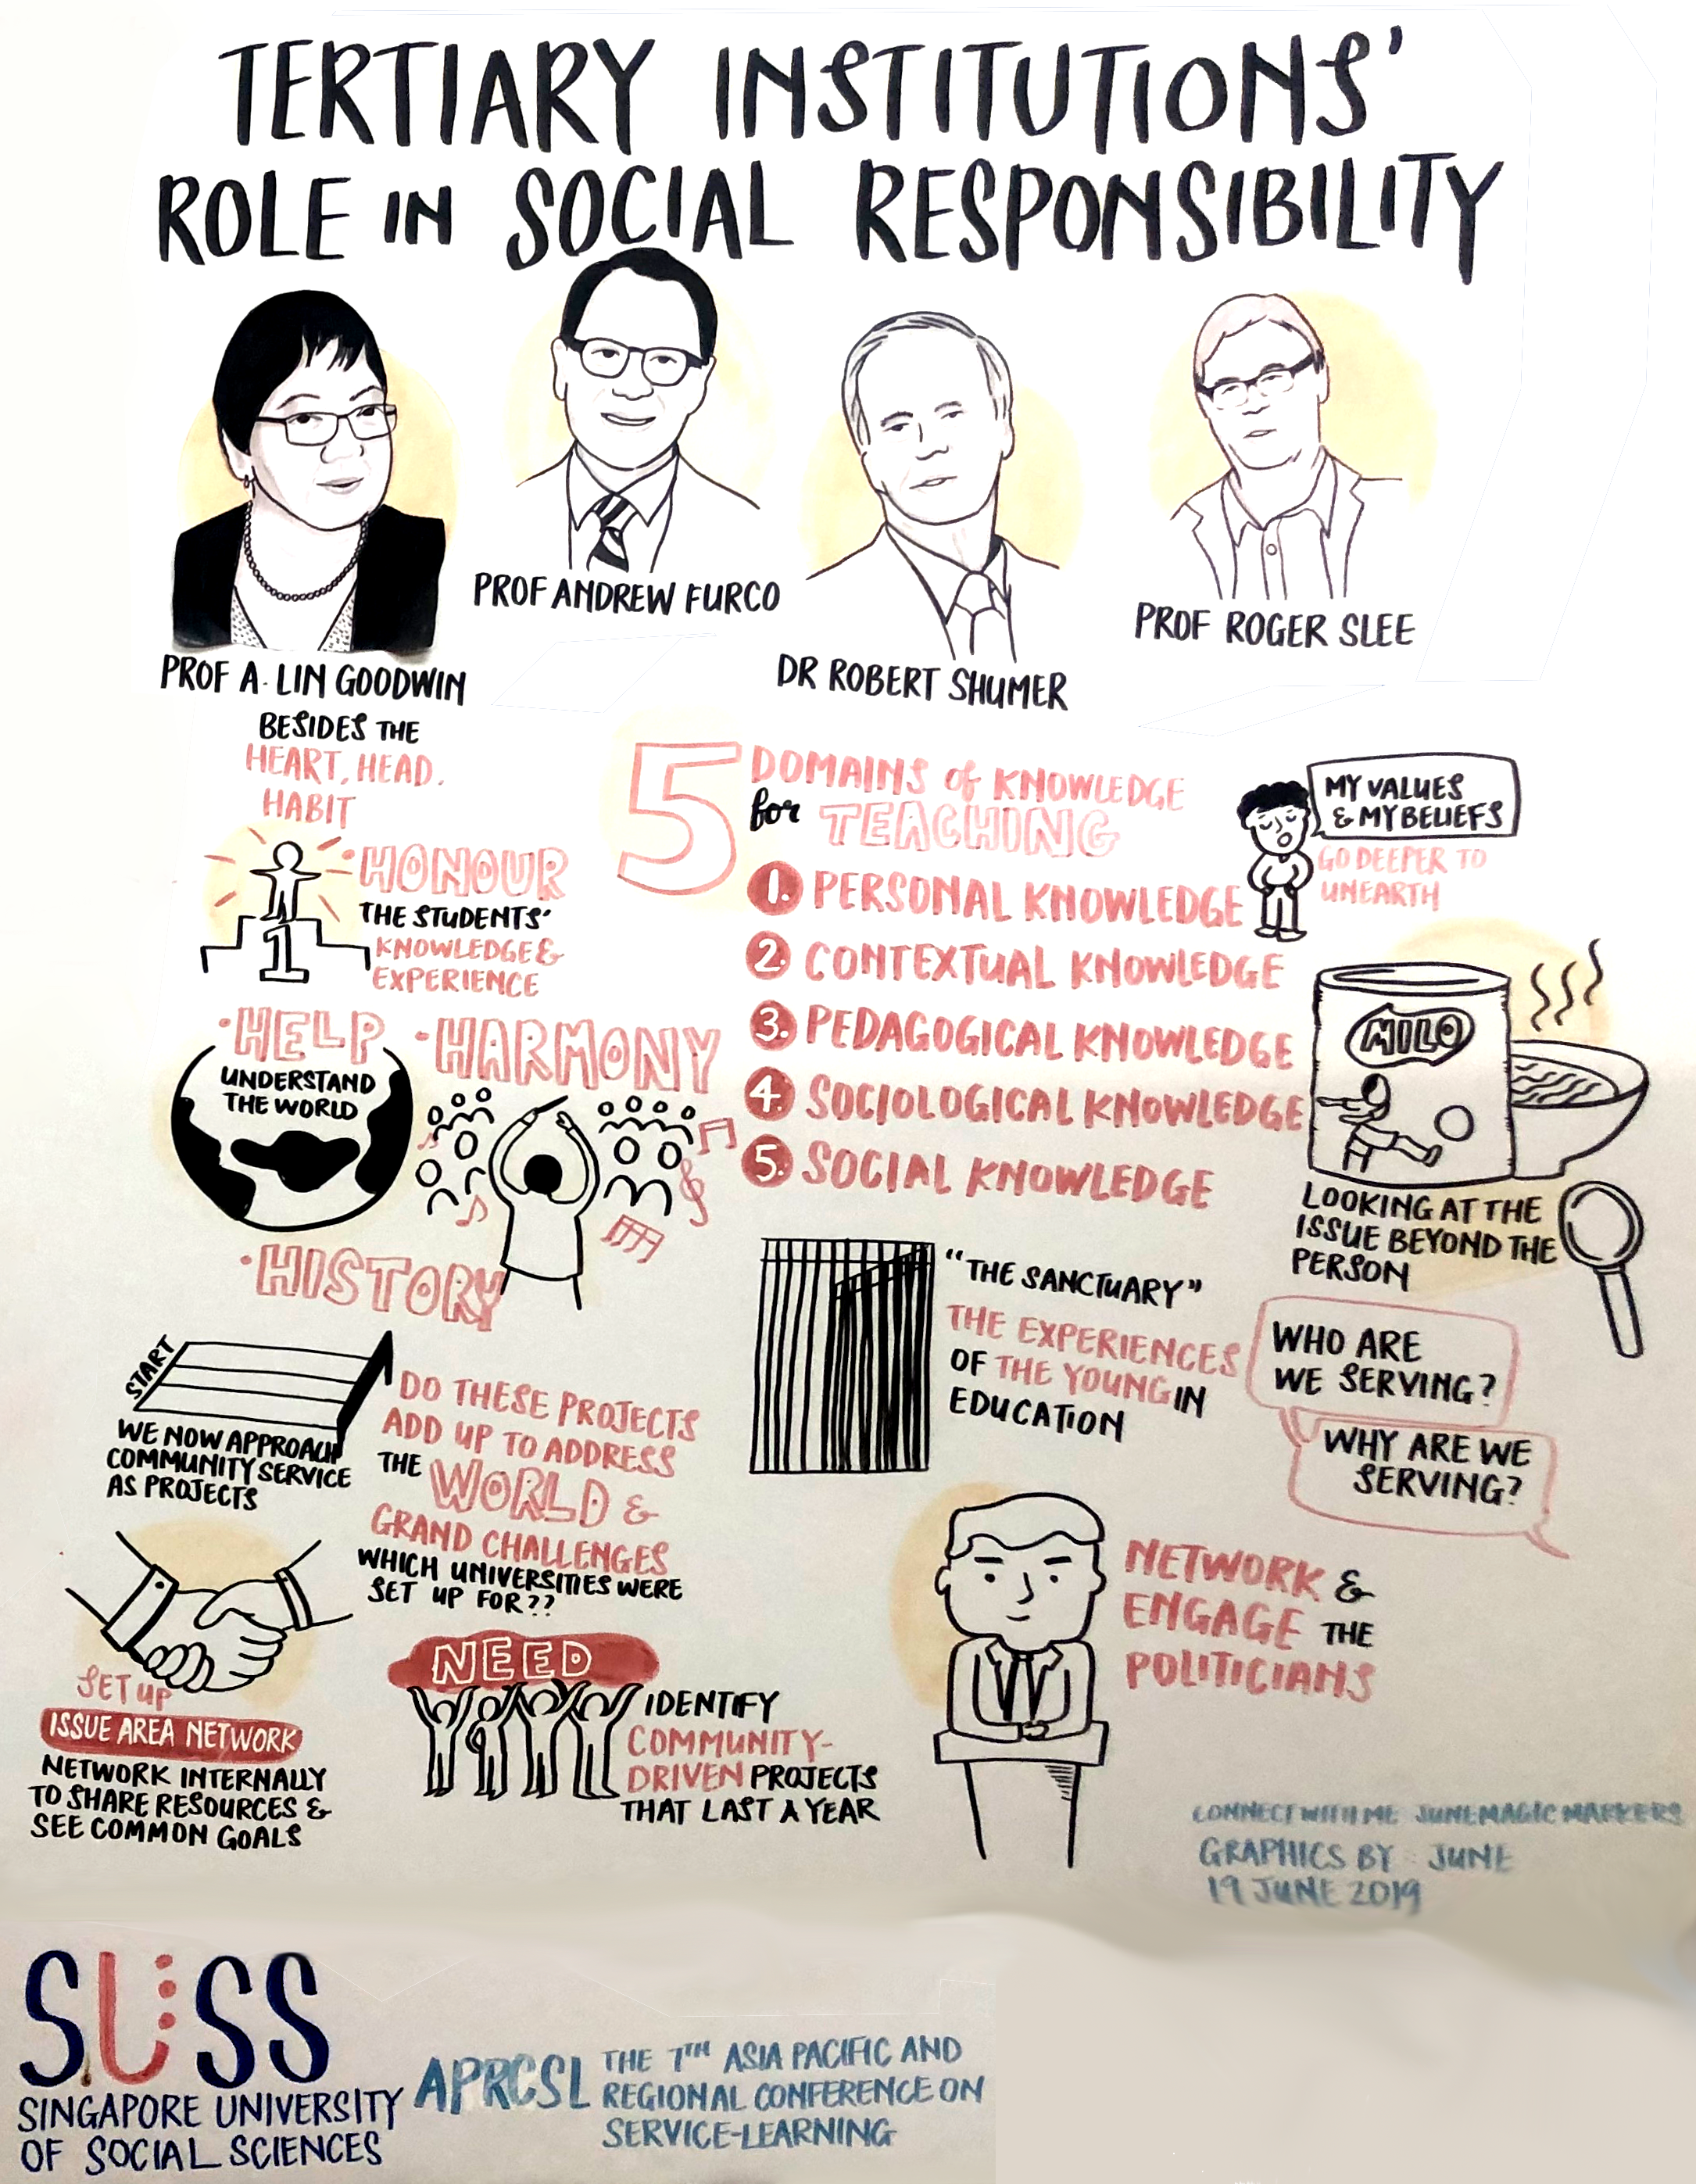 [Graphic Recording] Plenary Session 1B Tertiary Institutions Role in Social Responsibility